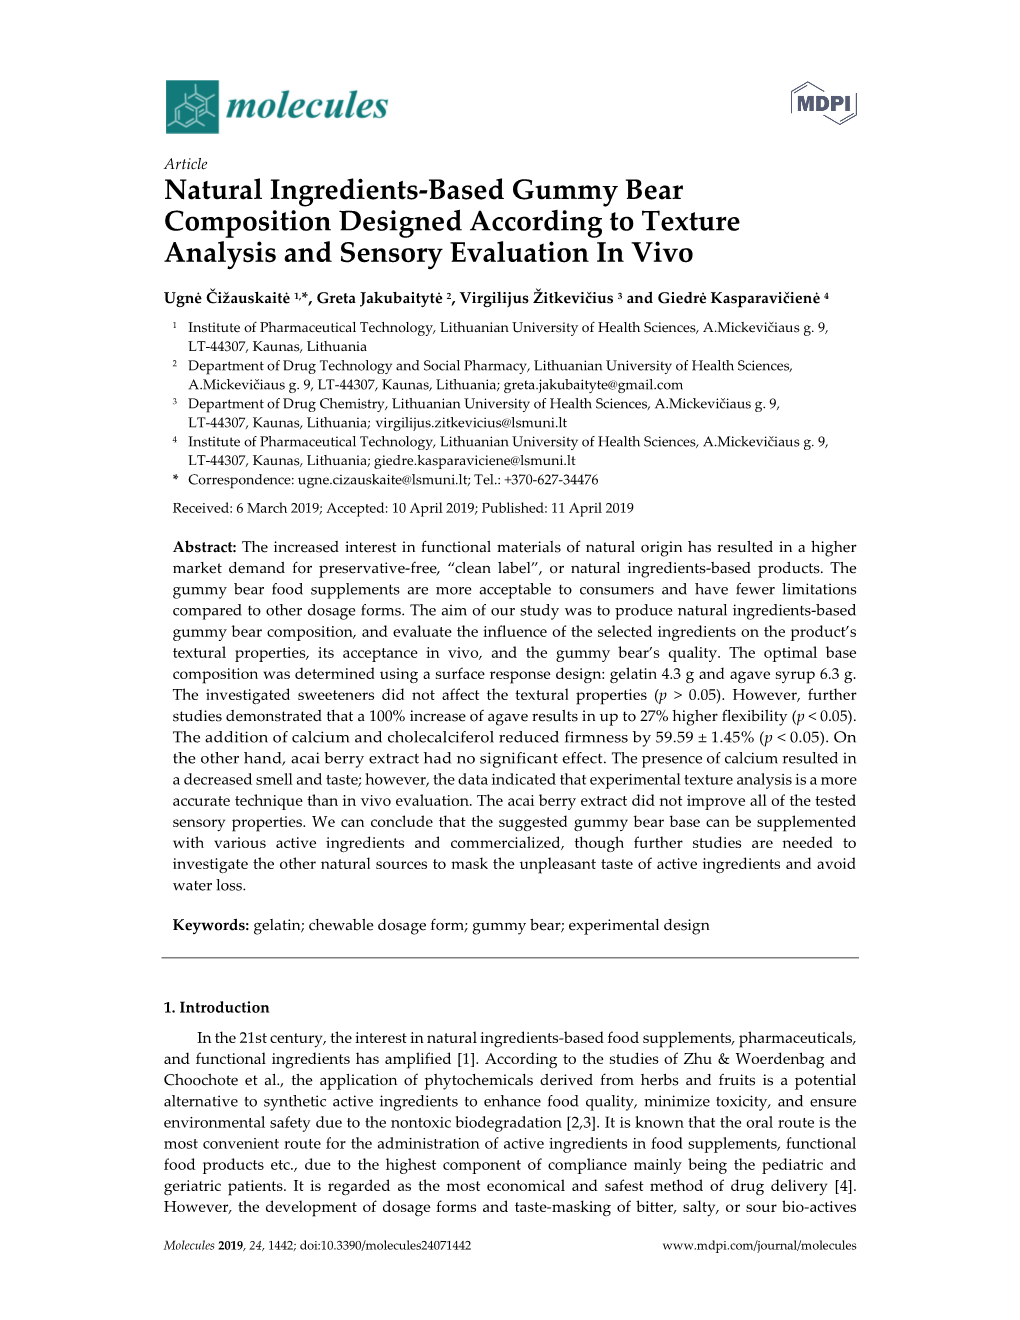 Natural Ingredients-Based Gummy Bear Composition Designed According to Texture Analysis and Sensory Evaluation in Vivo